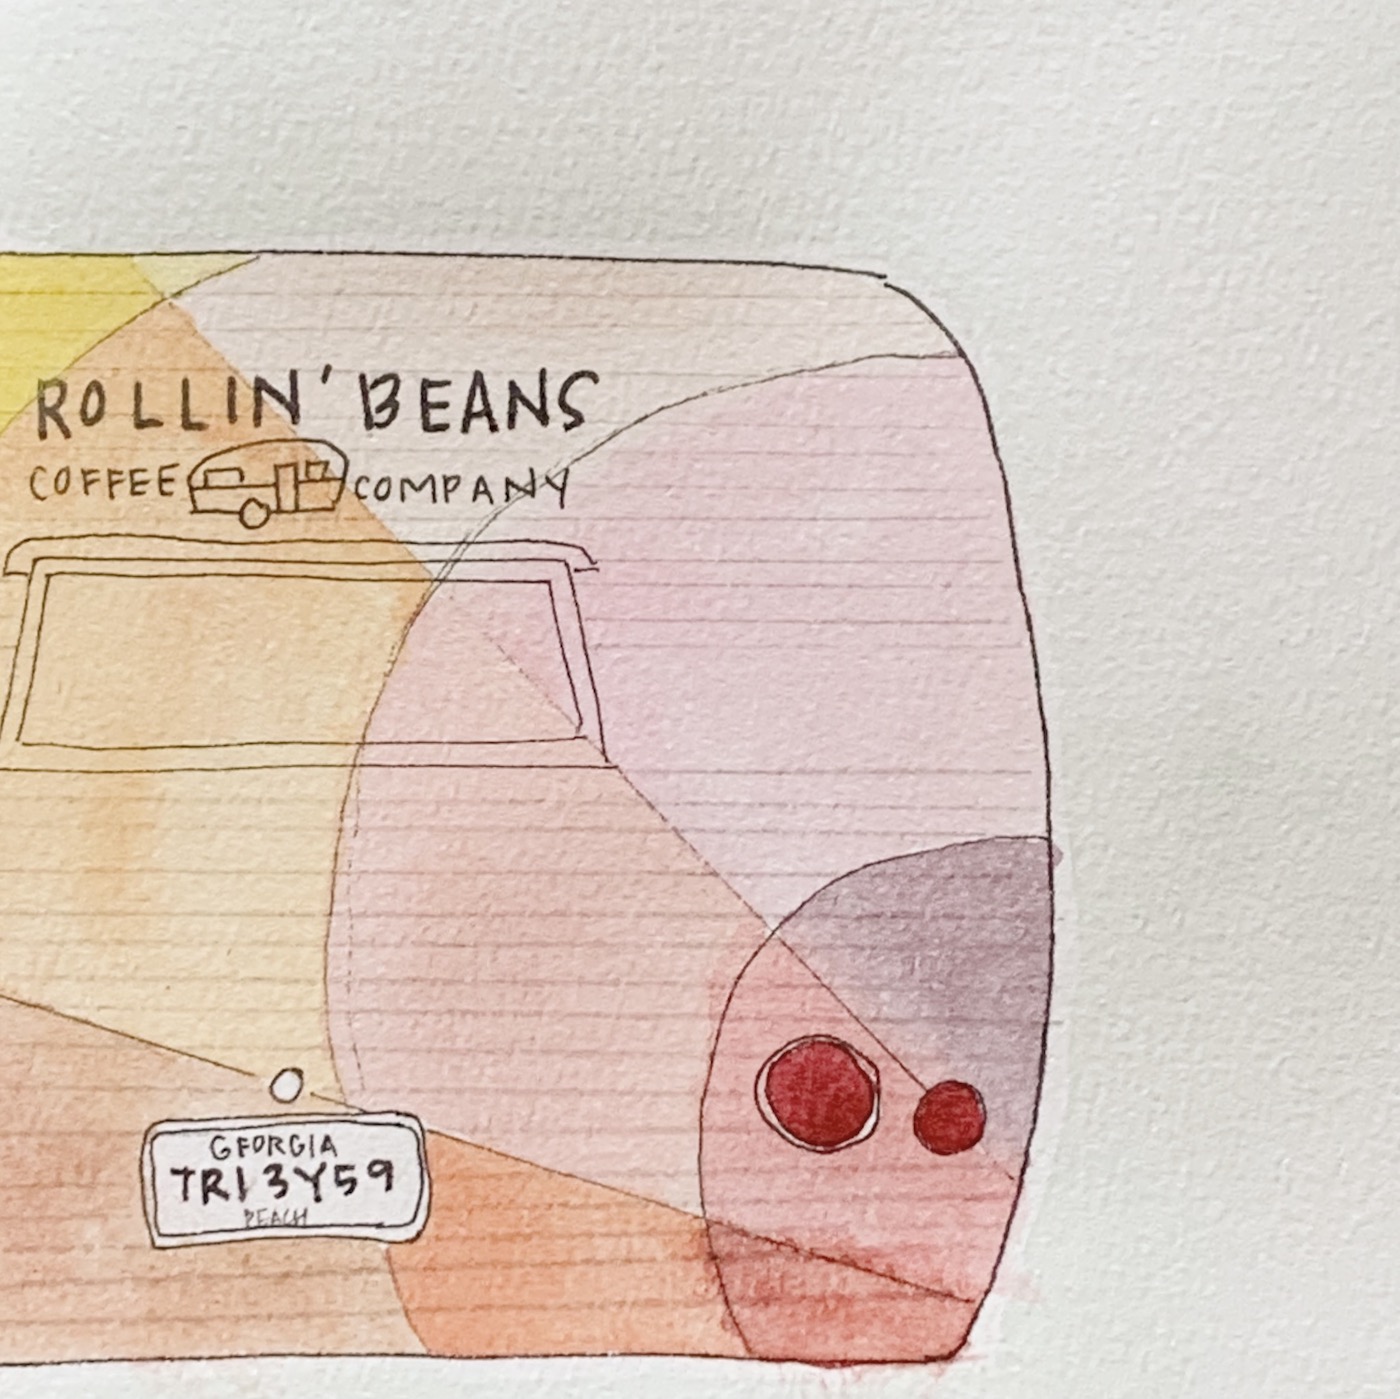 Celebrating National Coffee Day with Rollin' Beans! 